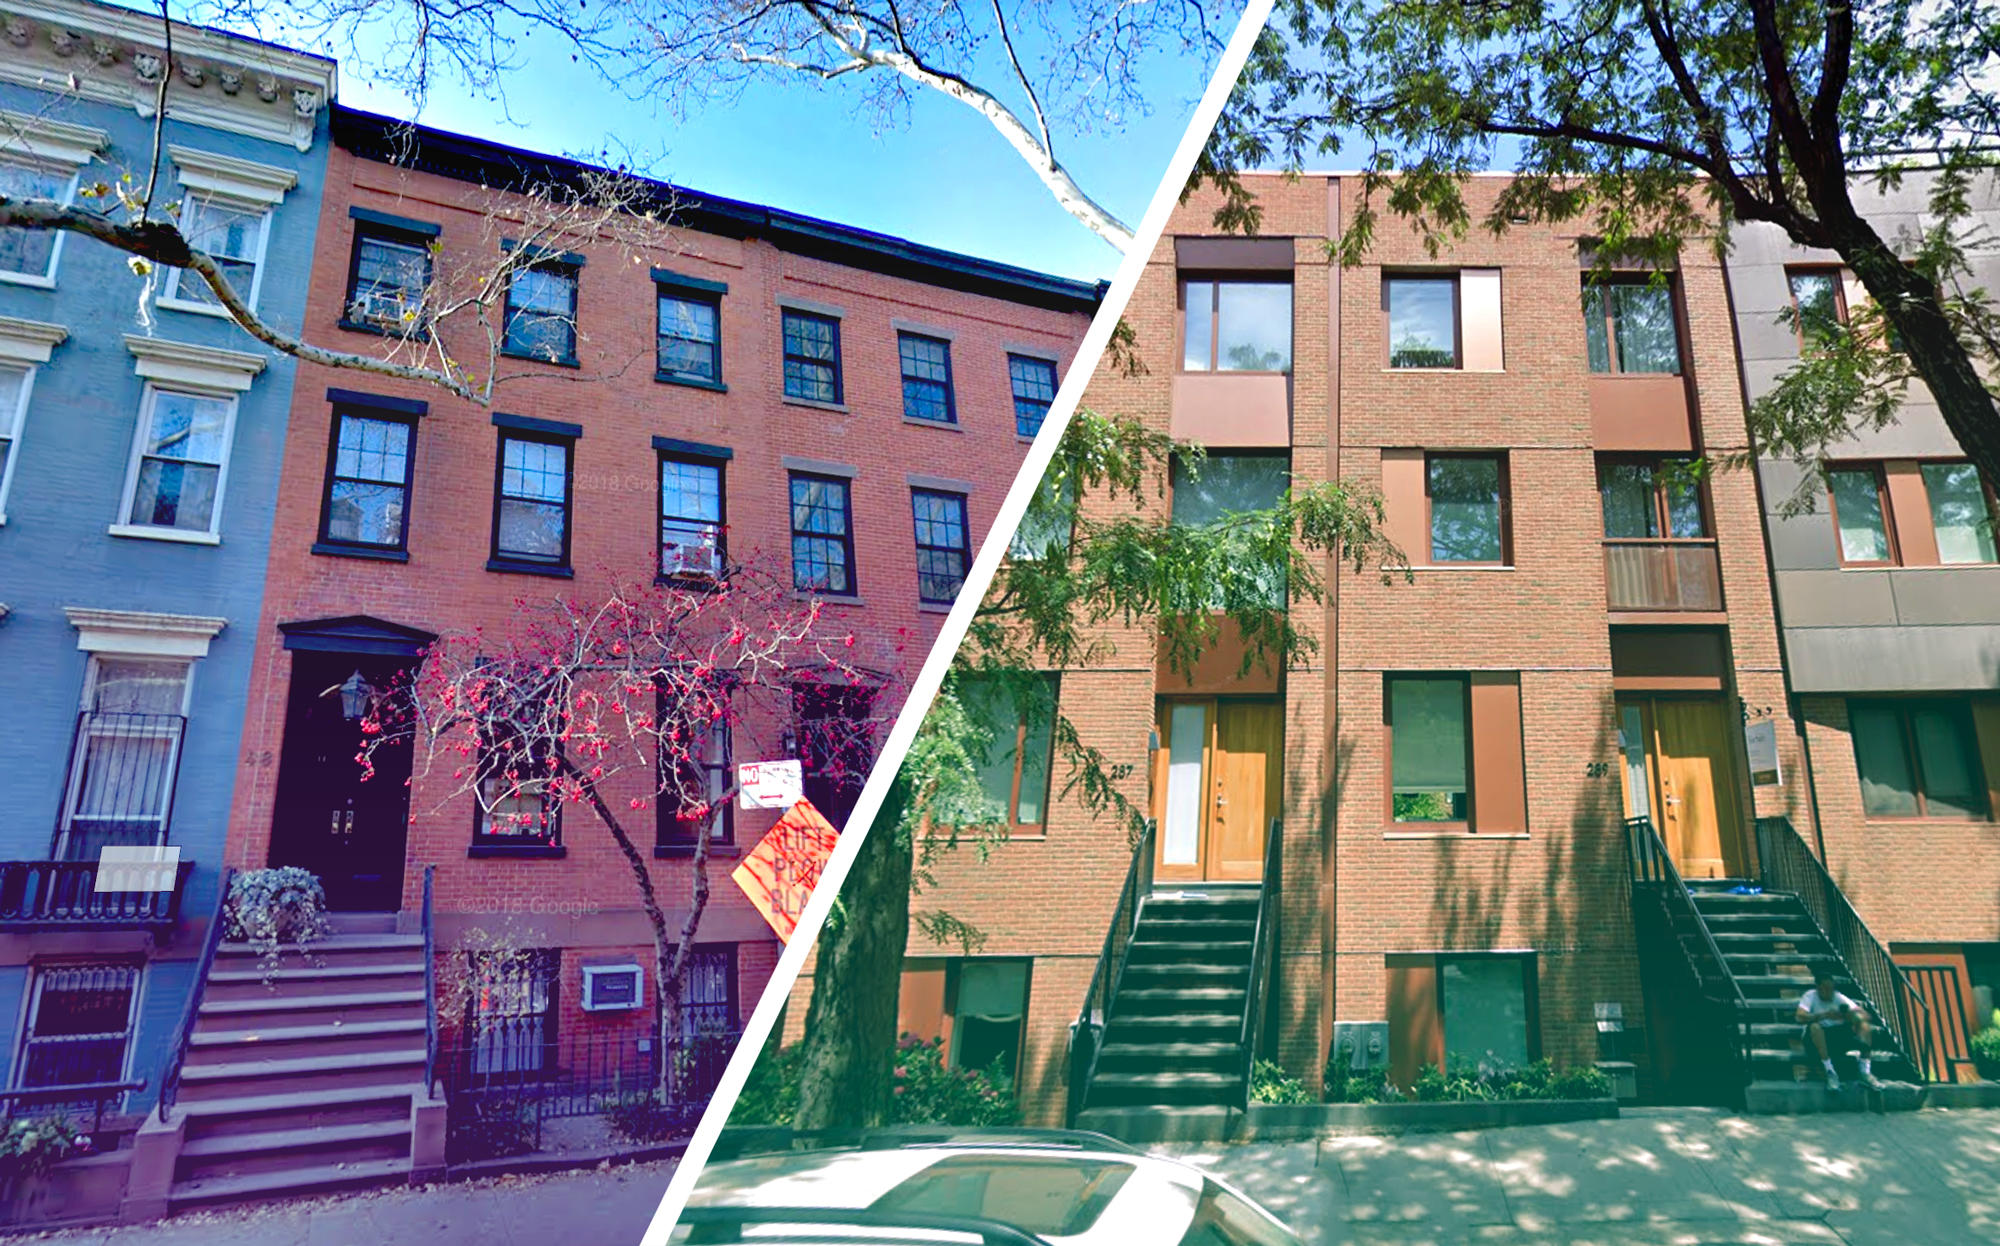 48 Sidney Place and 289 Union Street in Brooklyn (Credit: Google Maps)